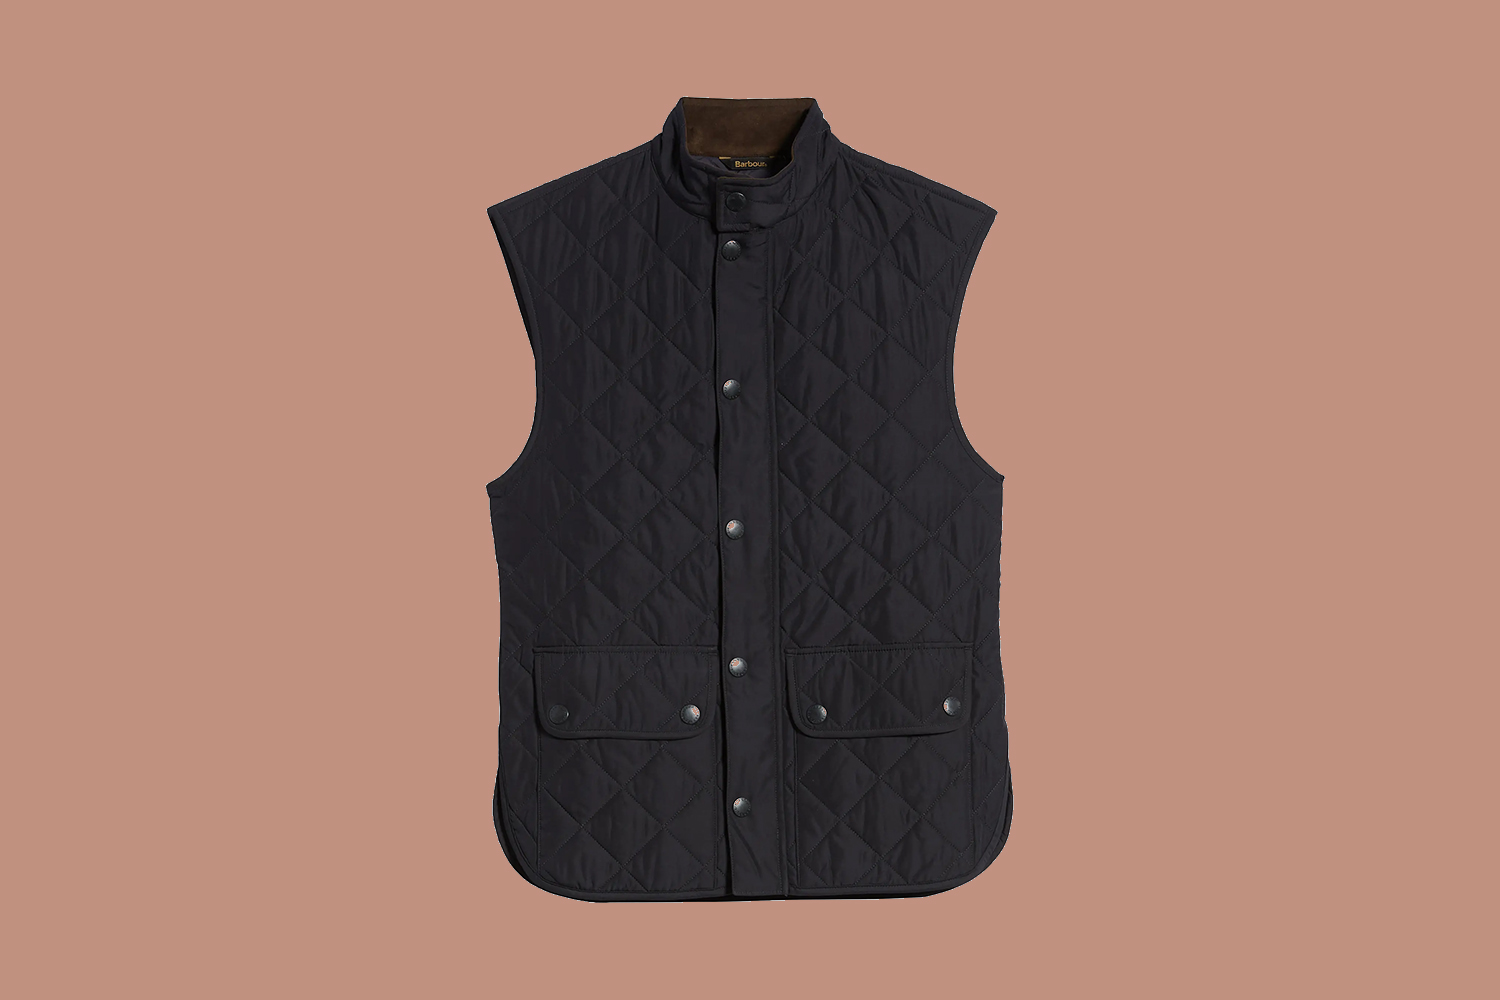 This Barbour Quilted Vest Is 60% Off at Nordstrom - InsideHook